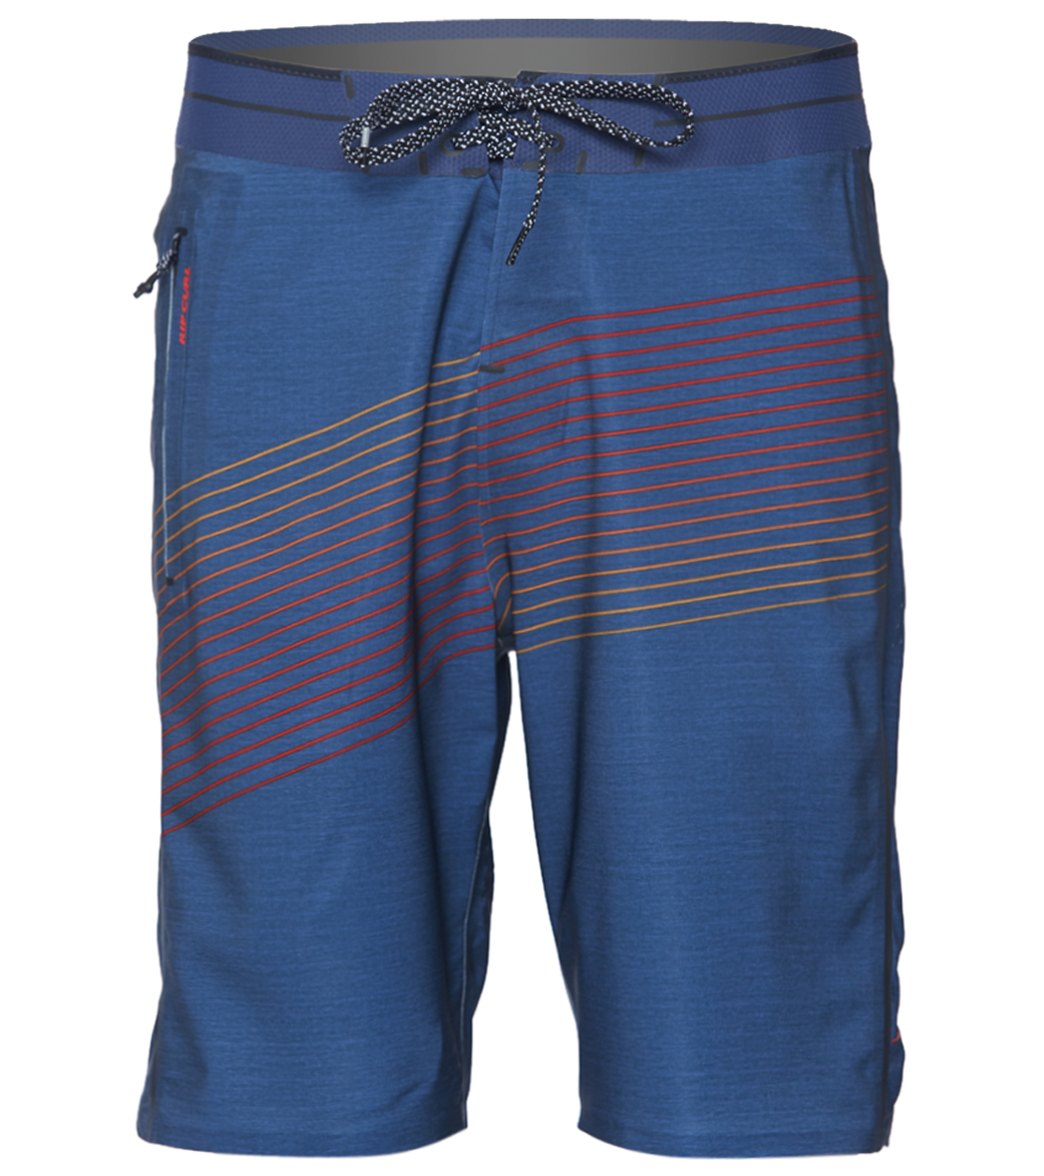 Rip Curl Mirage Fanning Invert Ultimate 20" Board Shorts at SwimOutlet.com